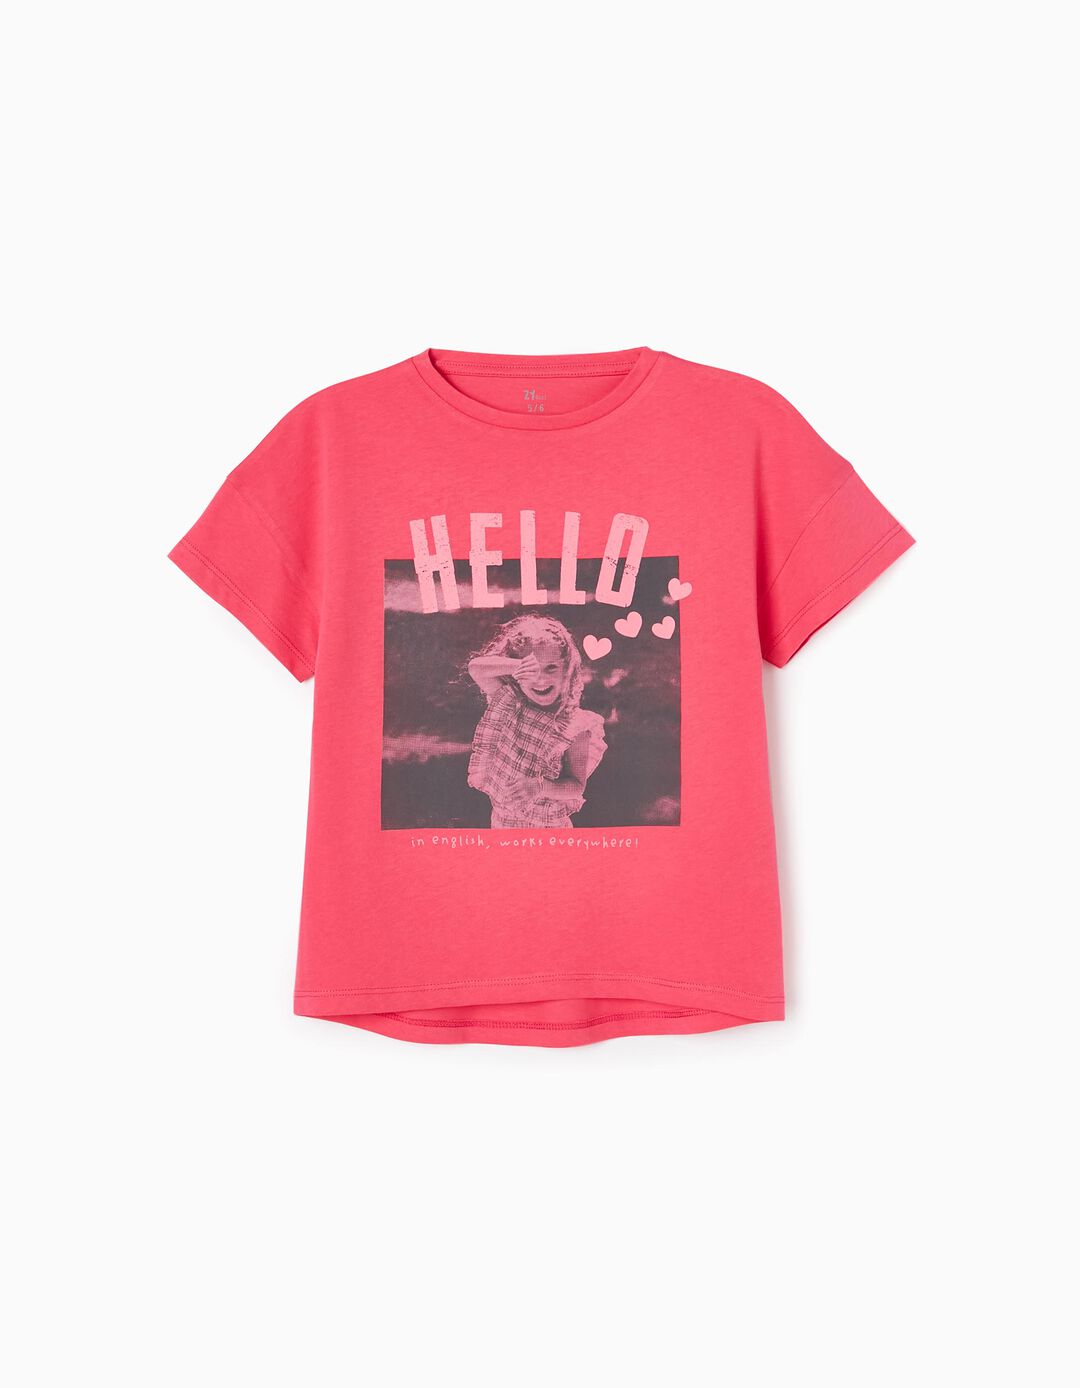 Cotton T-shirt for Girls 'Hello', Pink